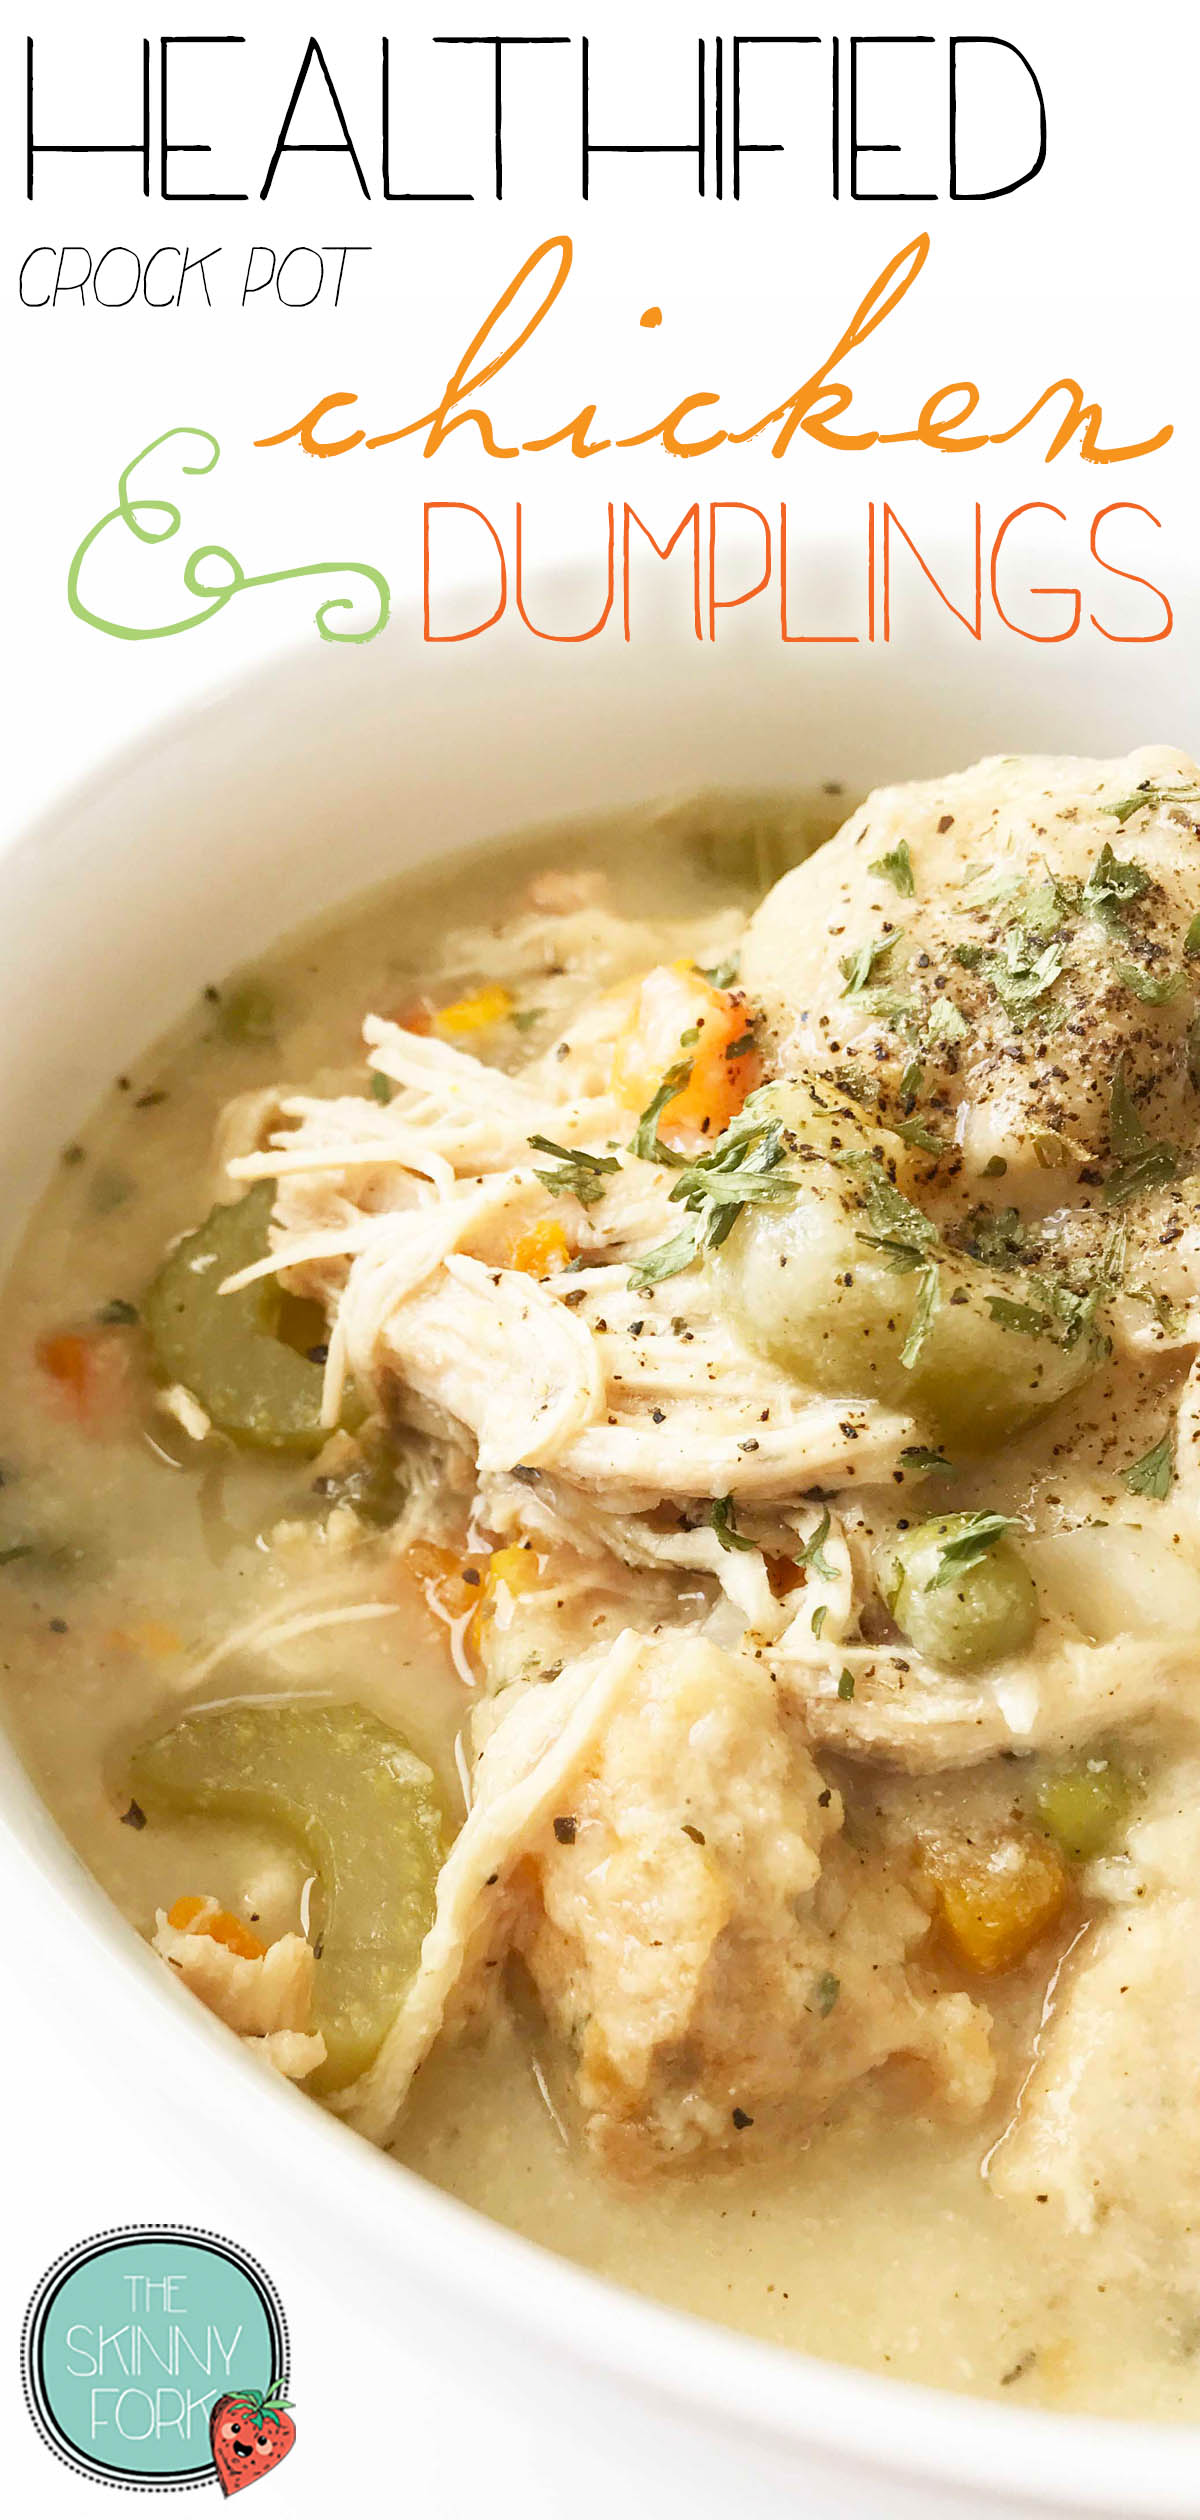 how long does it take to cook chicken and dumplings